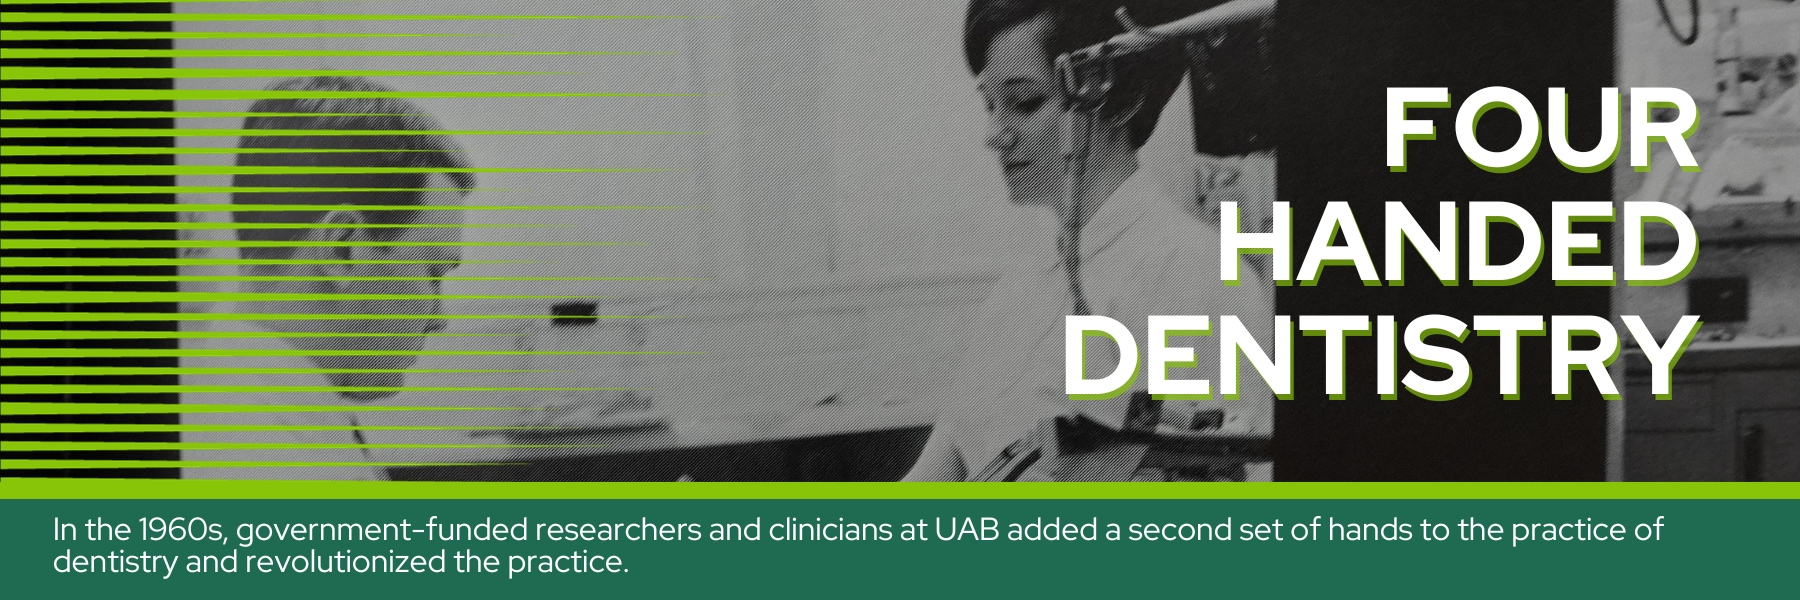 Four handed dentistry - In the 1960s, government-funded researchers and clinicians at UAB added a second set of hands to the practice of dentistry and revolutionized the practice.